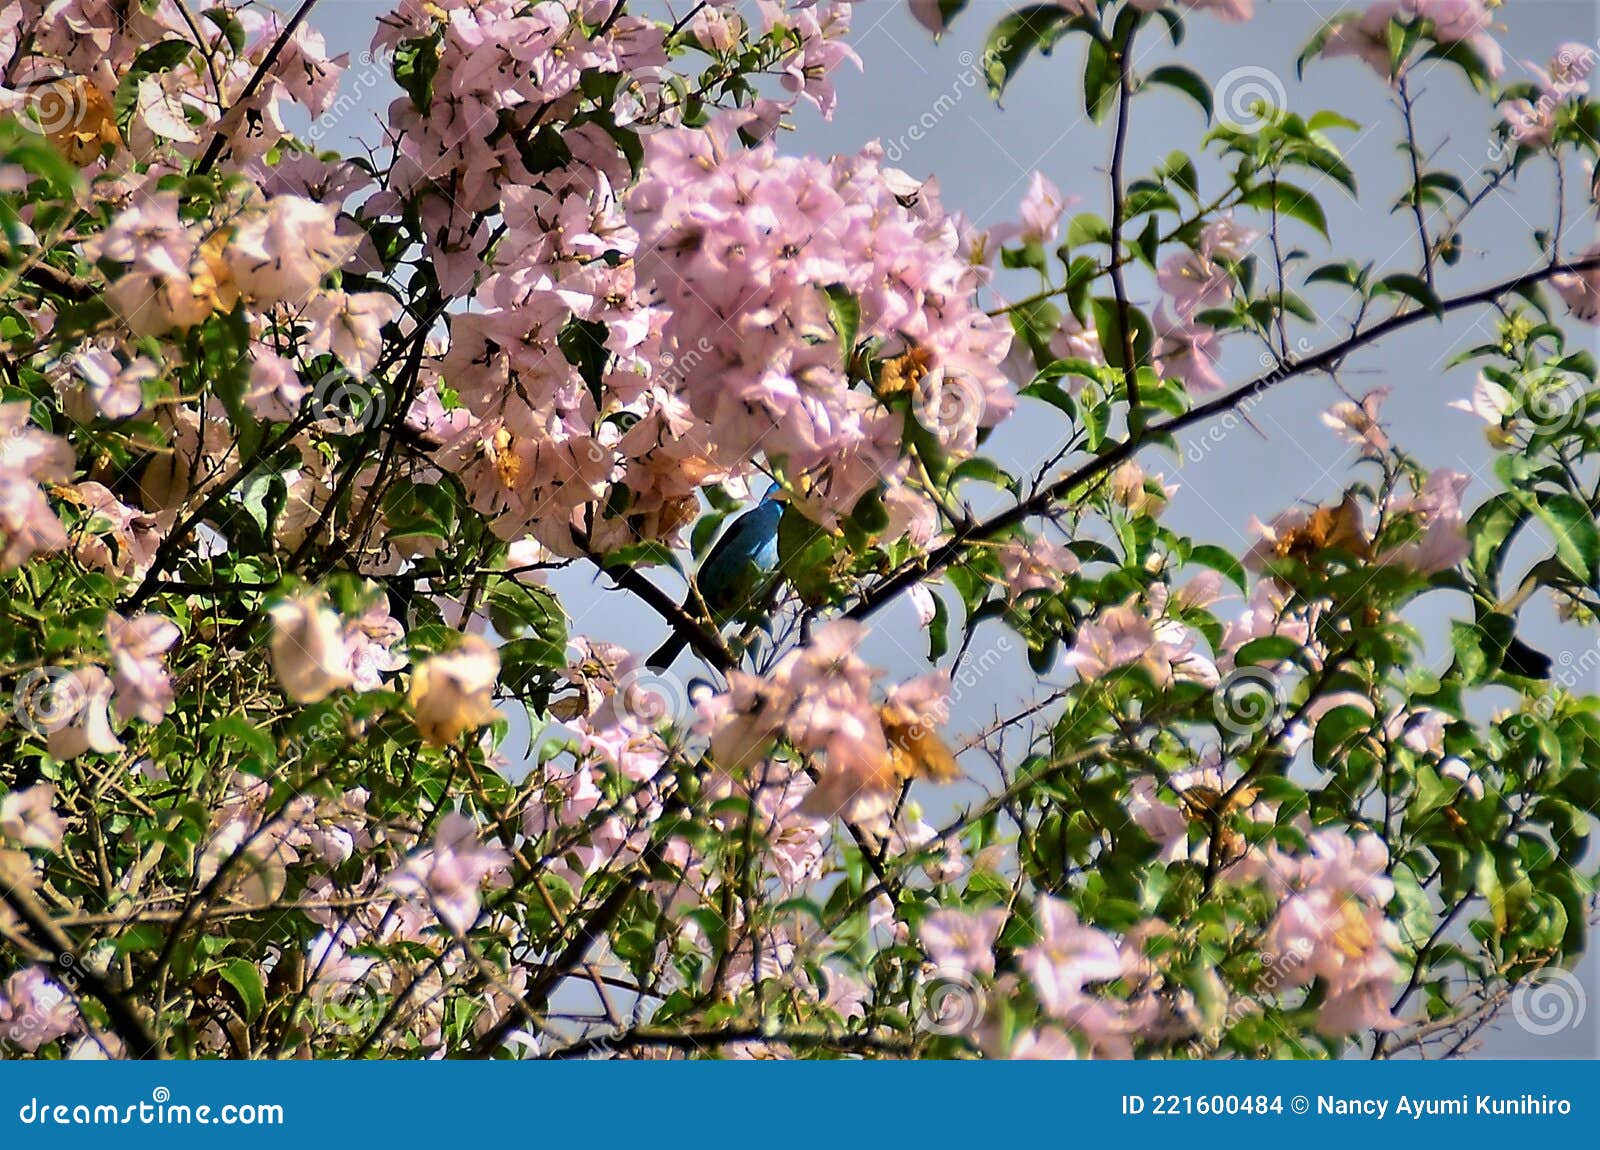 dacnis cayana in the middle of the pink flowers of bougainvillea